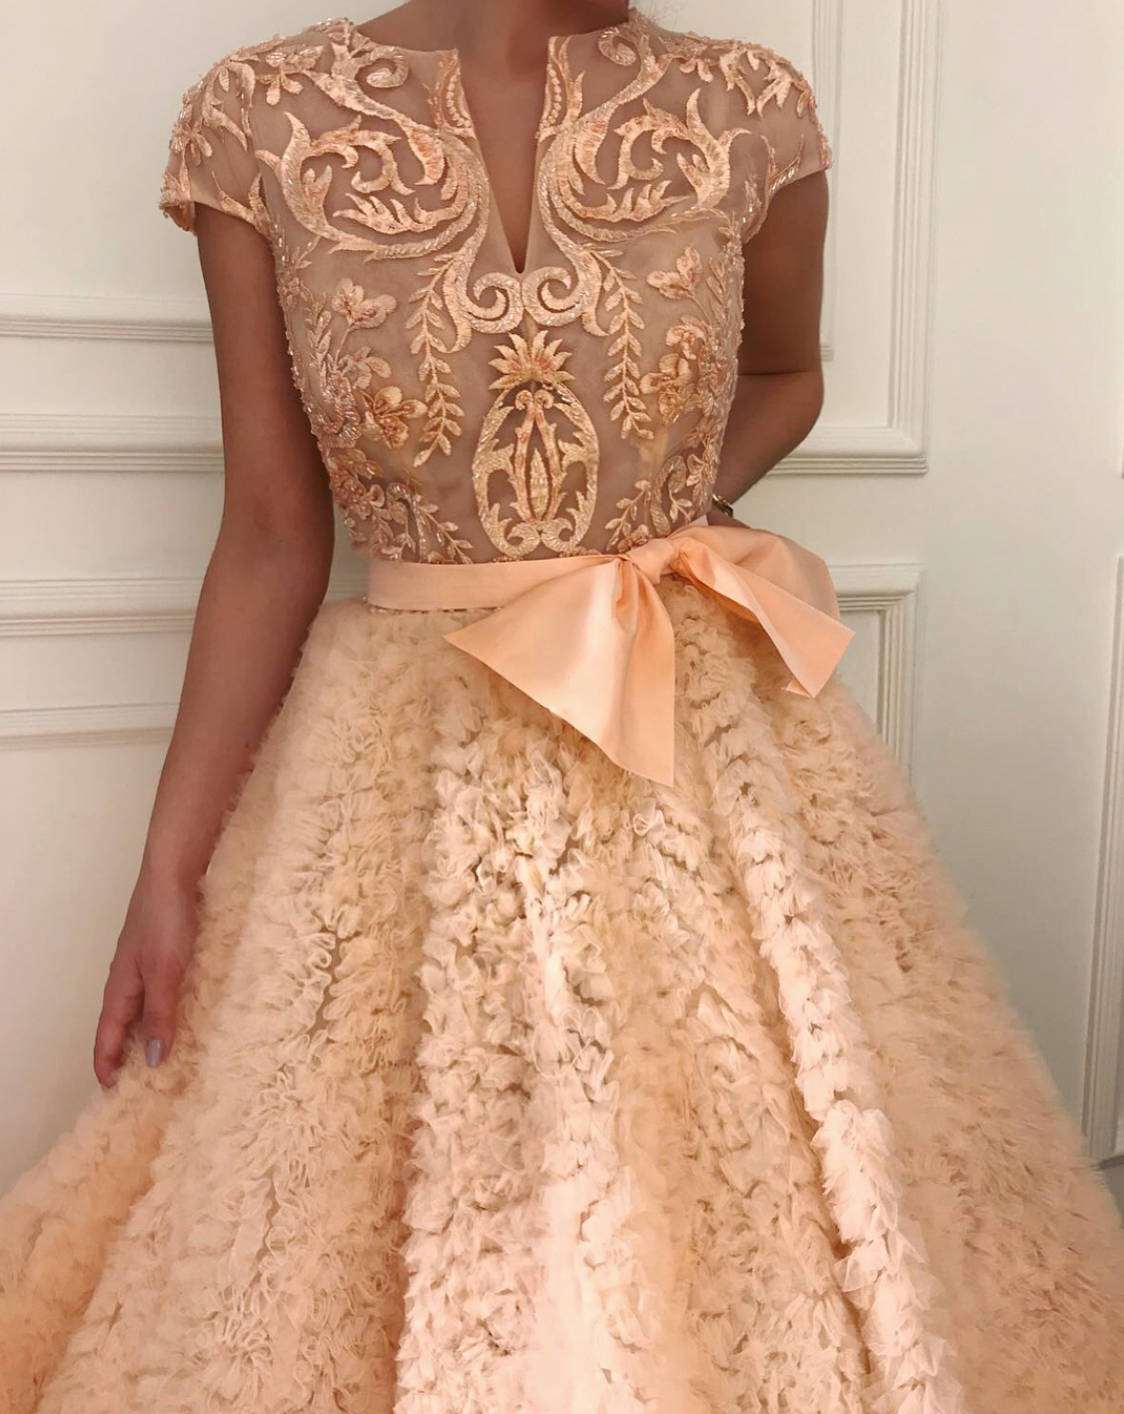 Peach A-Line dress with embroidery and no sleeves